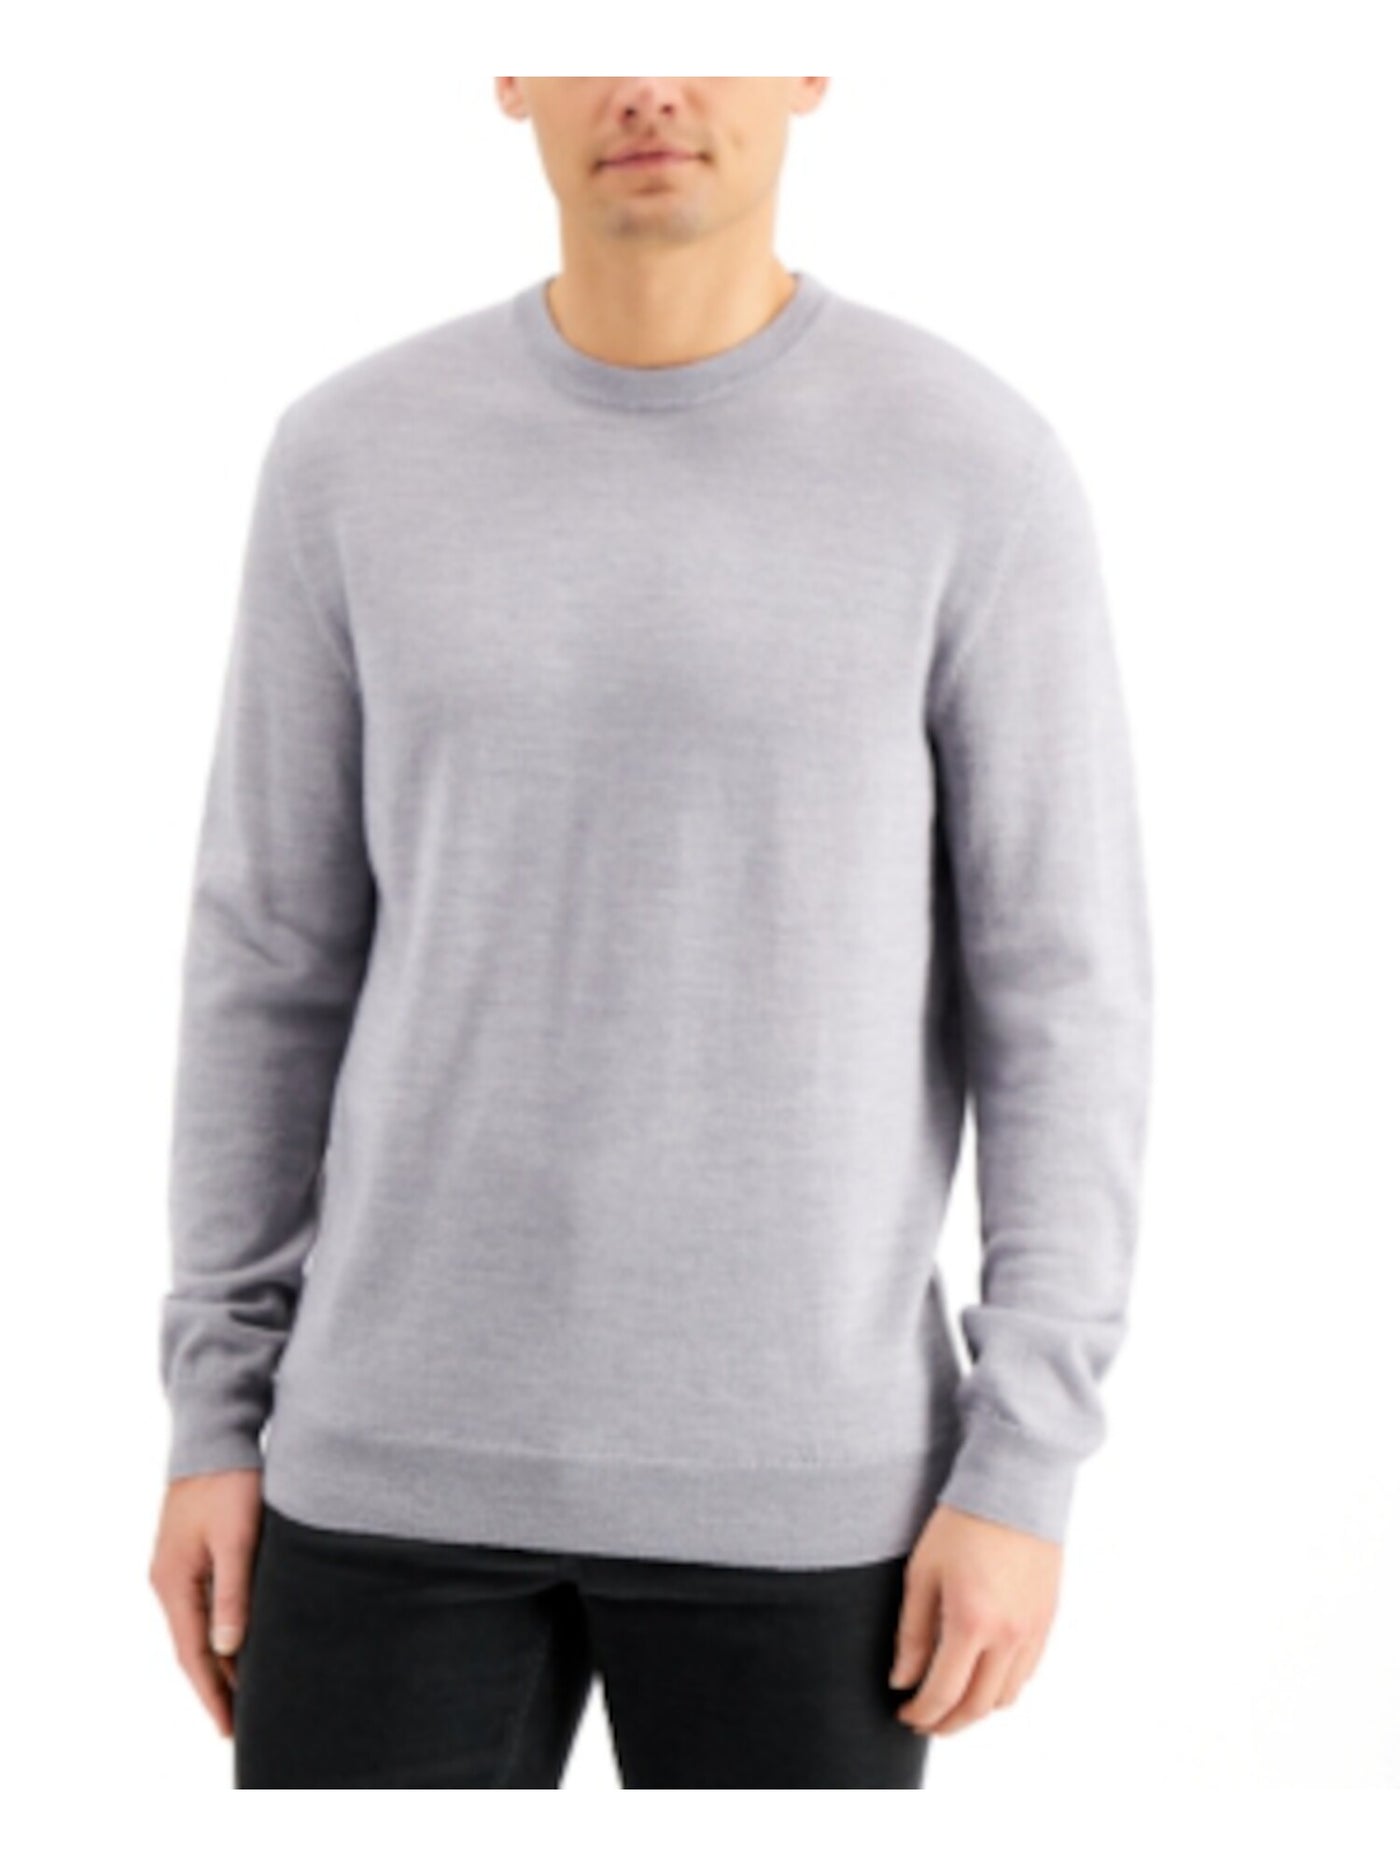 CLUBROOM Mens Gray Crew Neck Wool Blend Pullover Sweater S